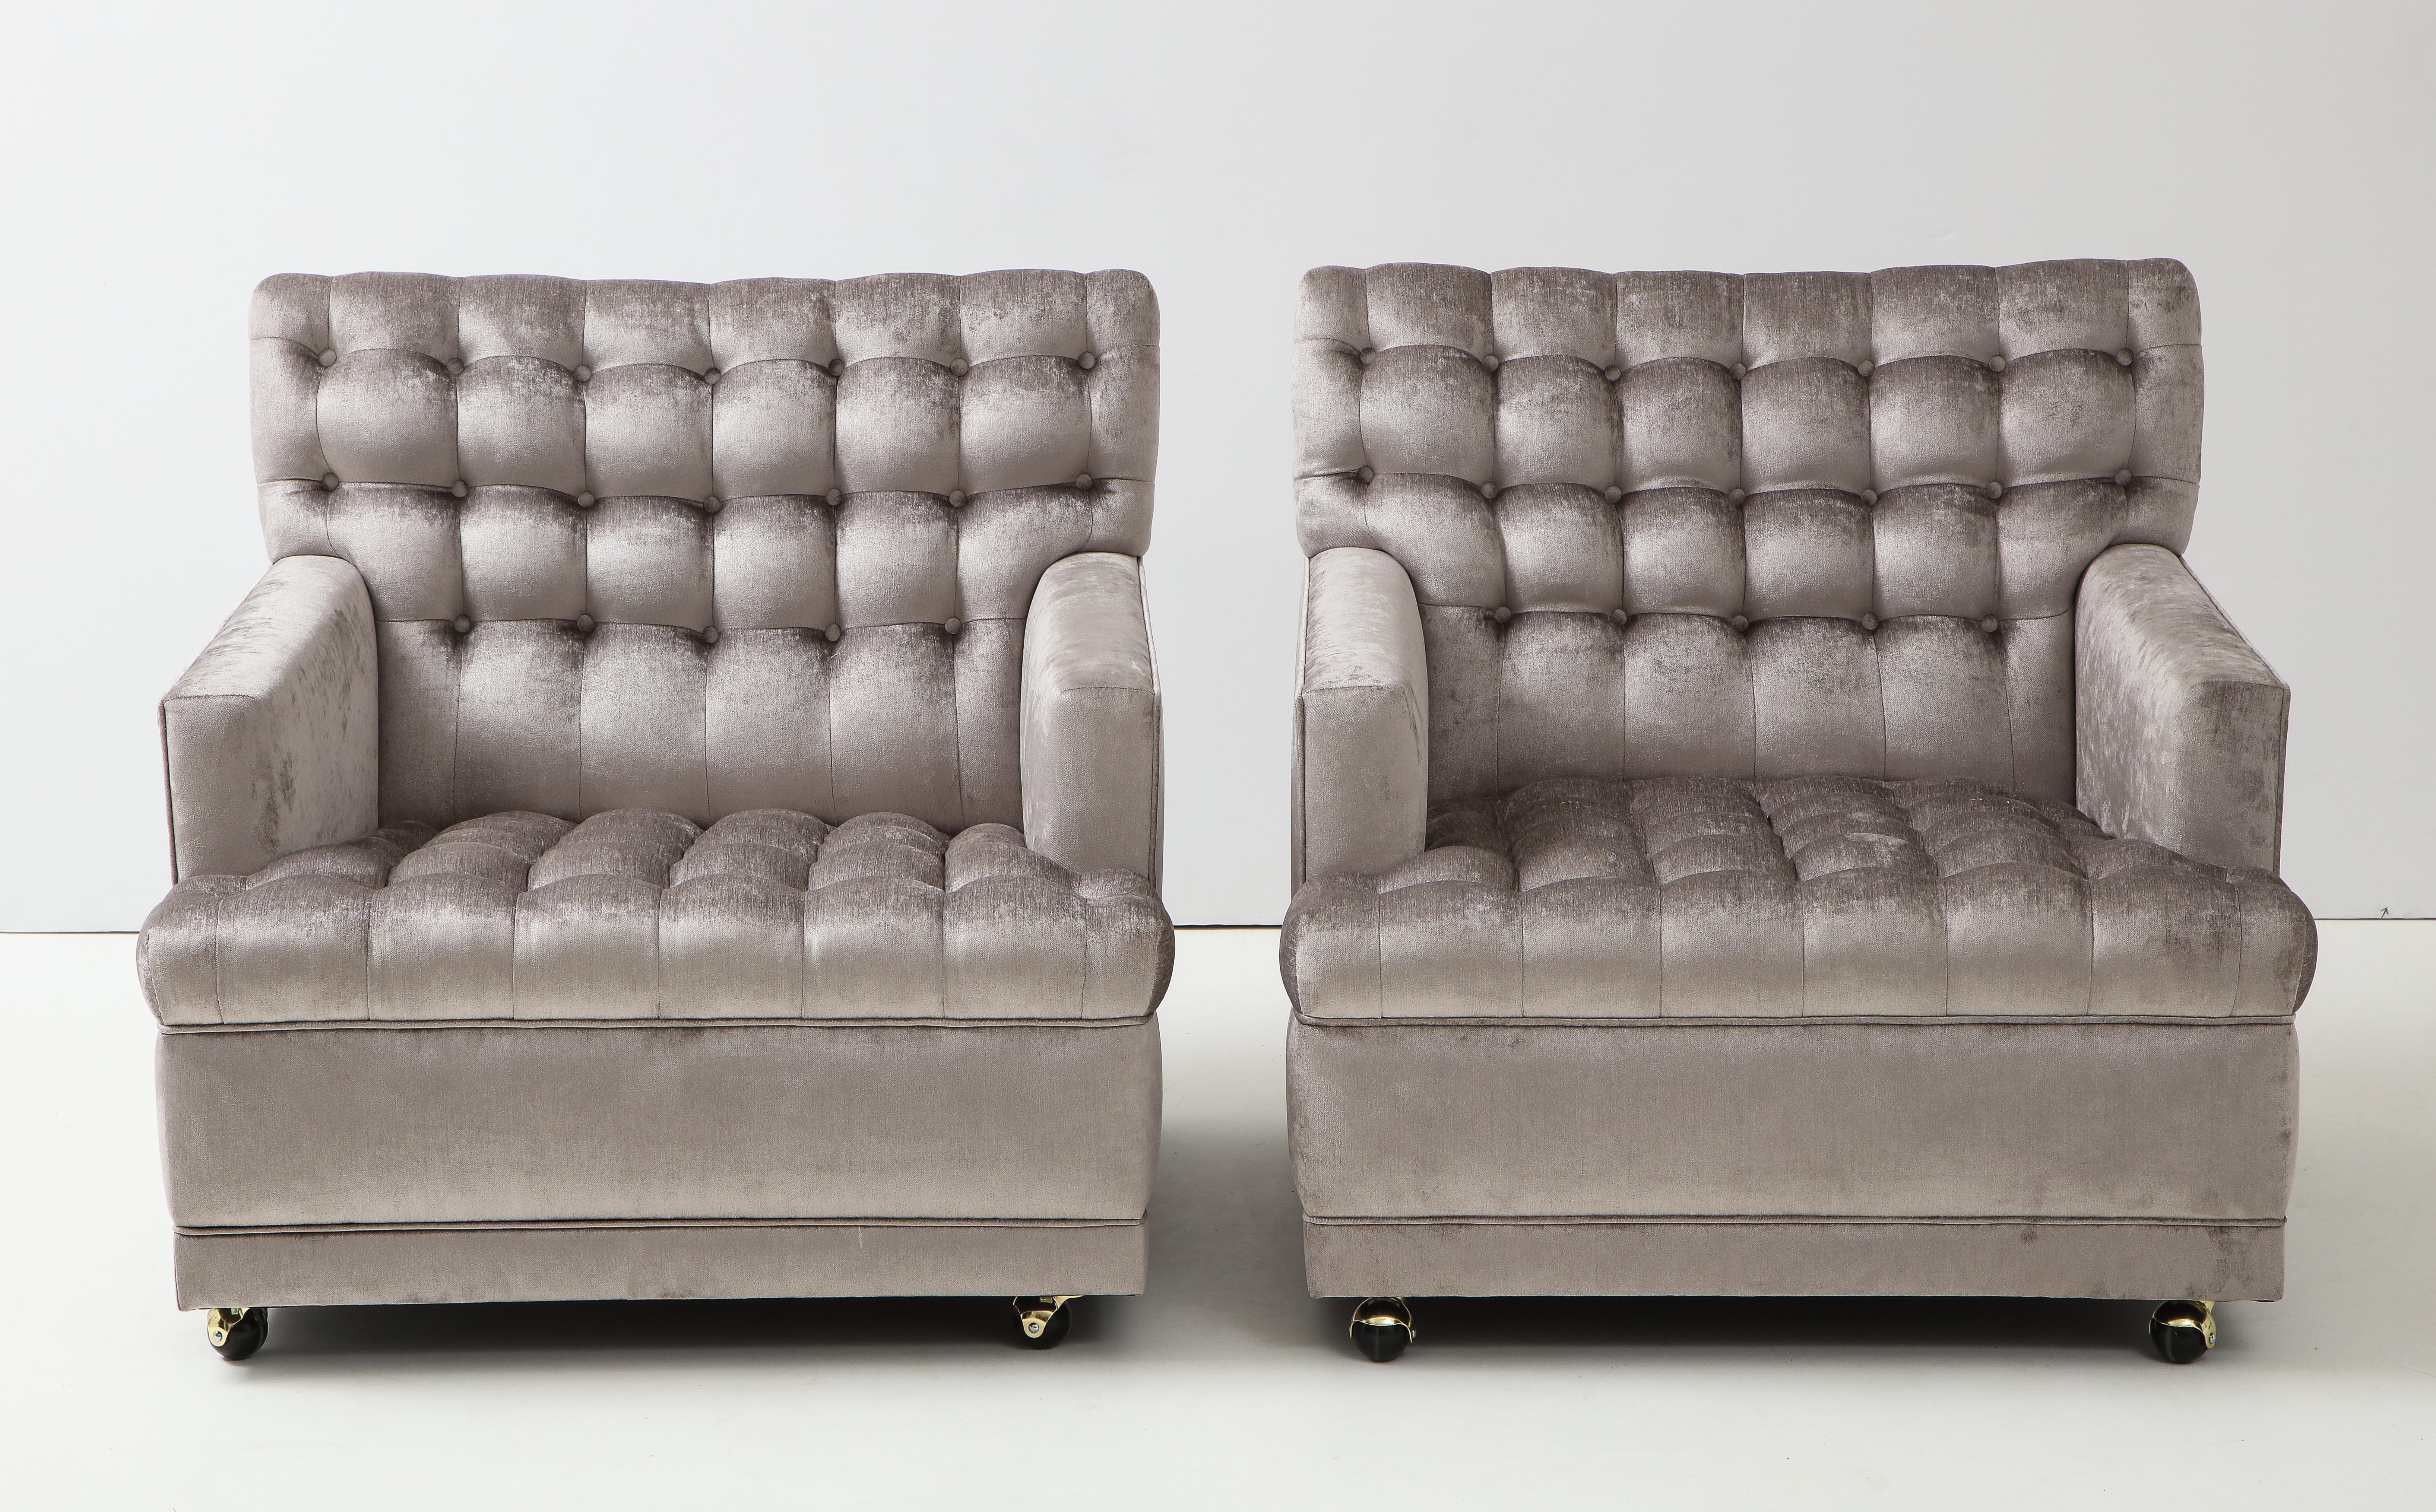 Hollywood Regency Pair of Biscuit Tufted Club Chairs.